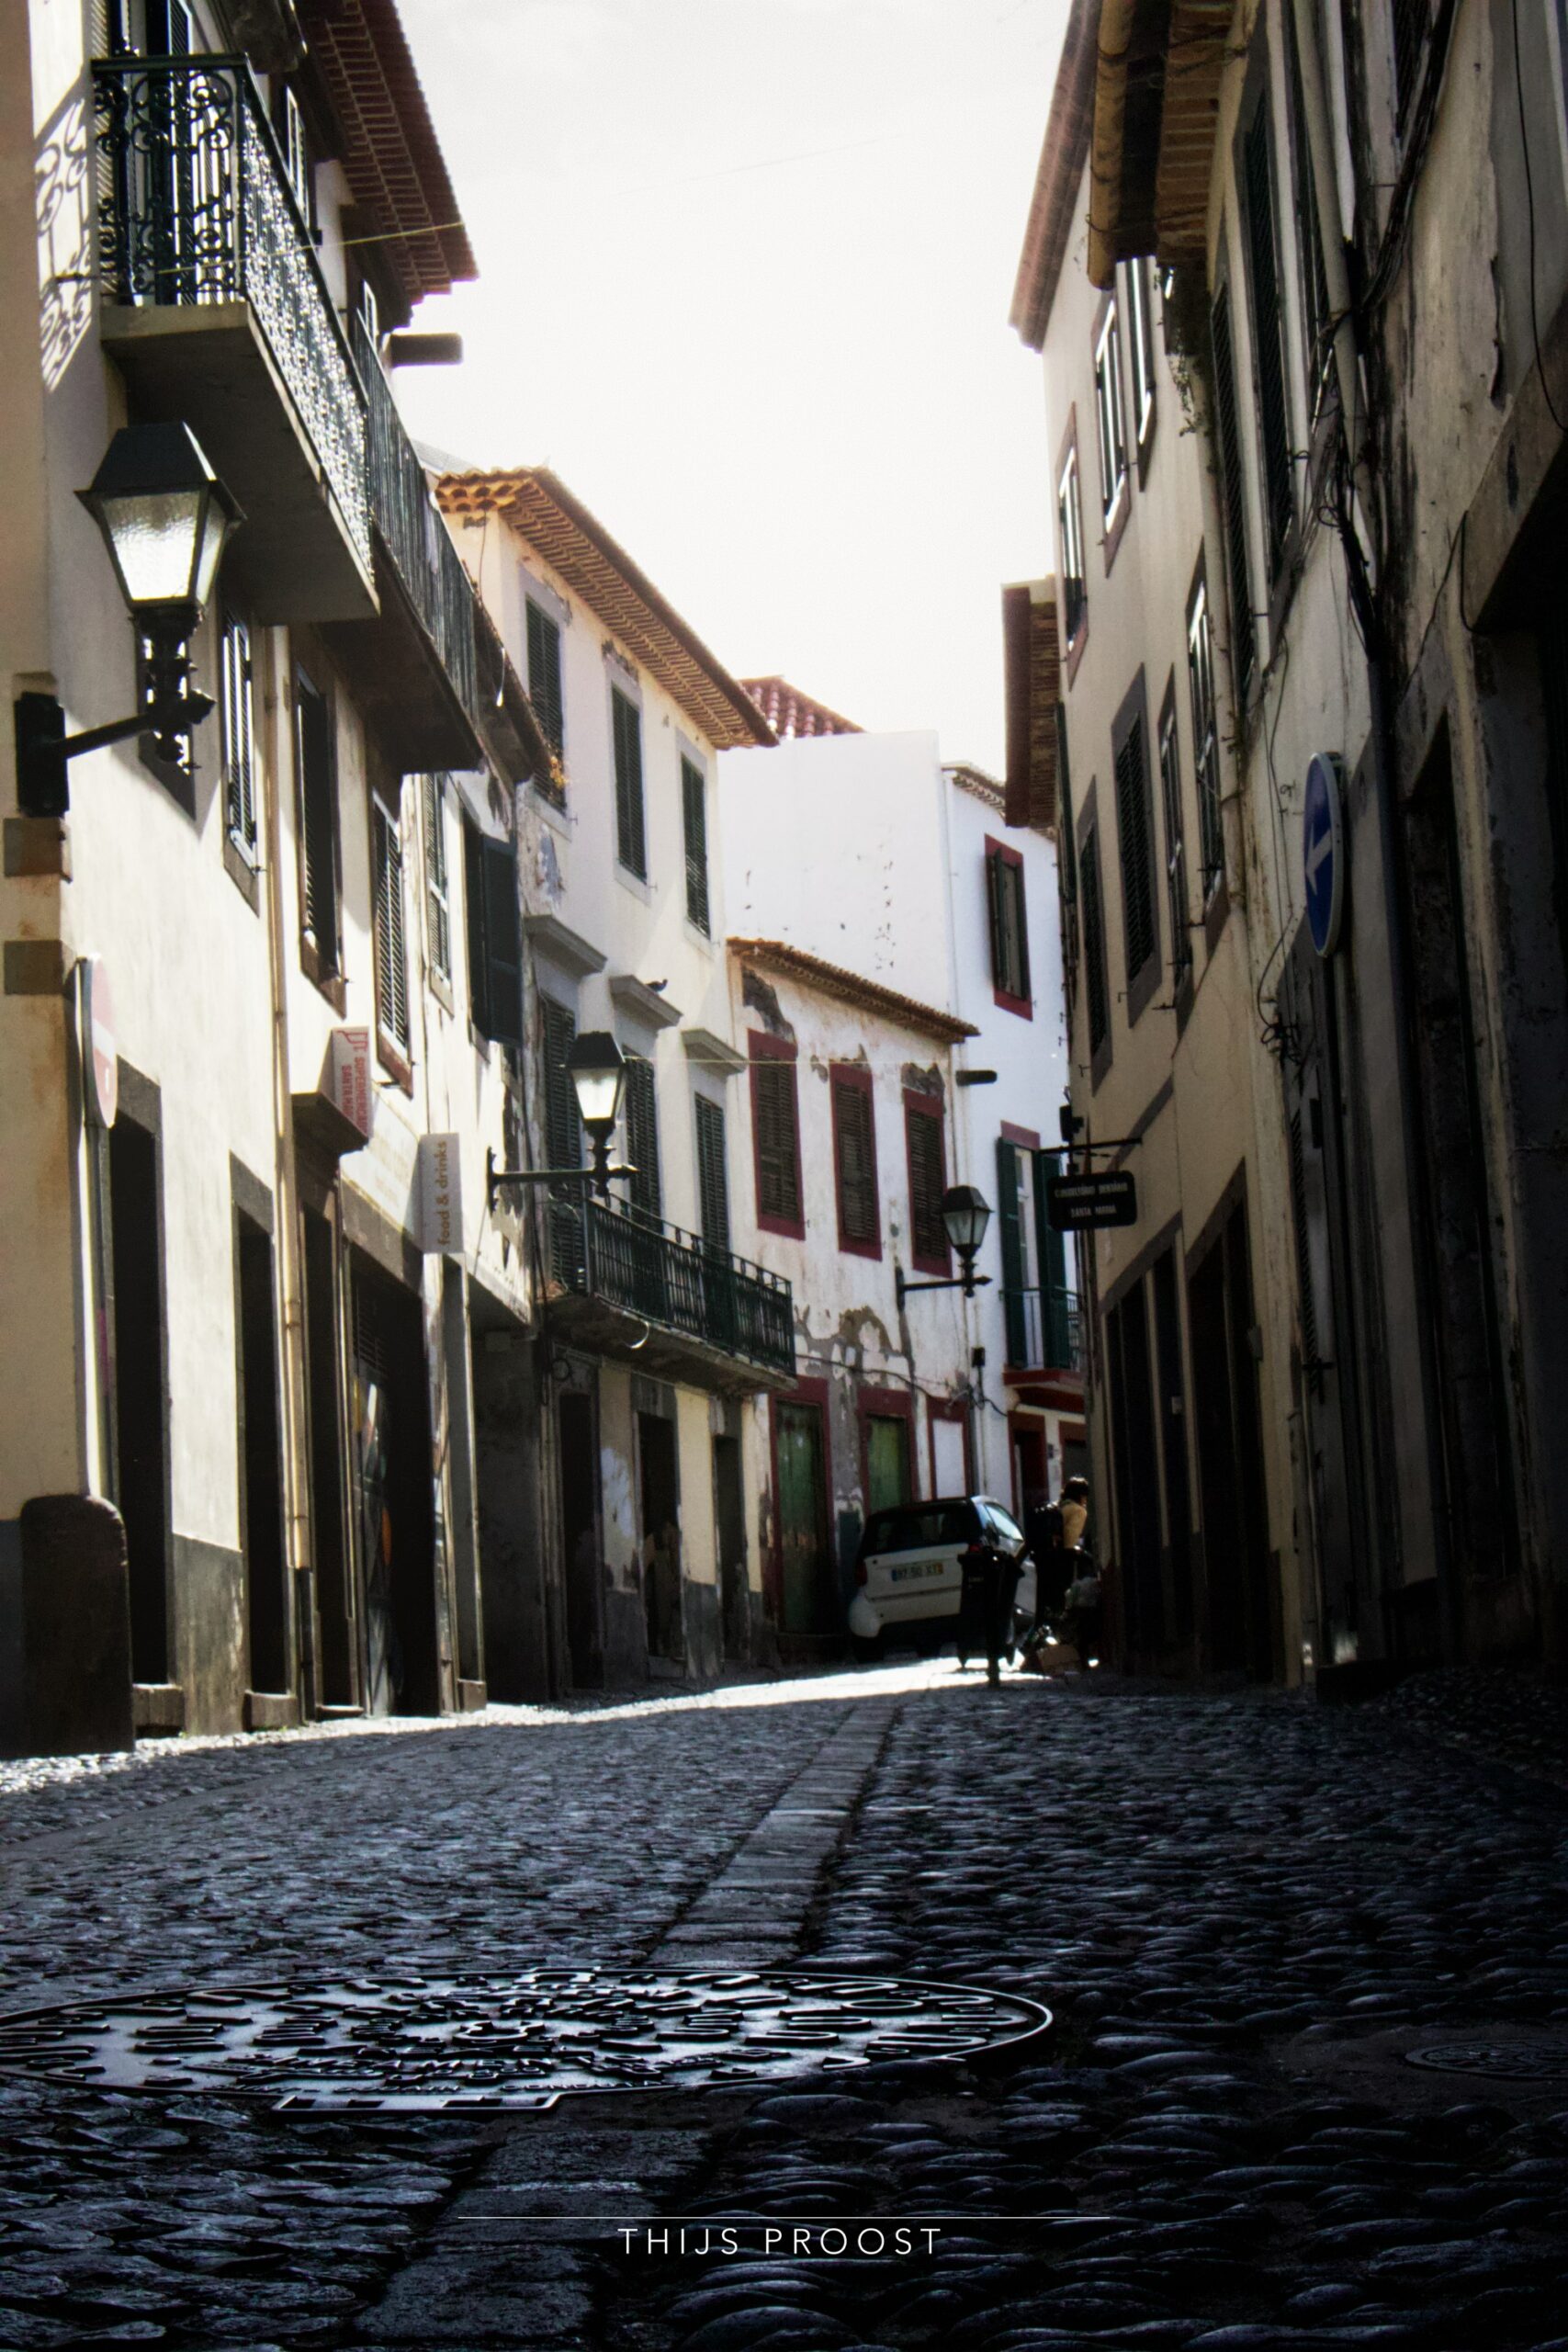 A view of a street in the center of Funchal Madeira. Light hits the buildings while the street remains in shadow.